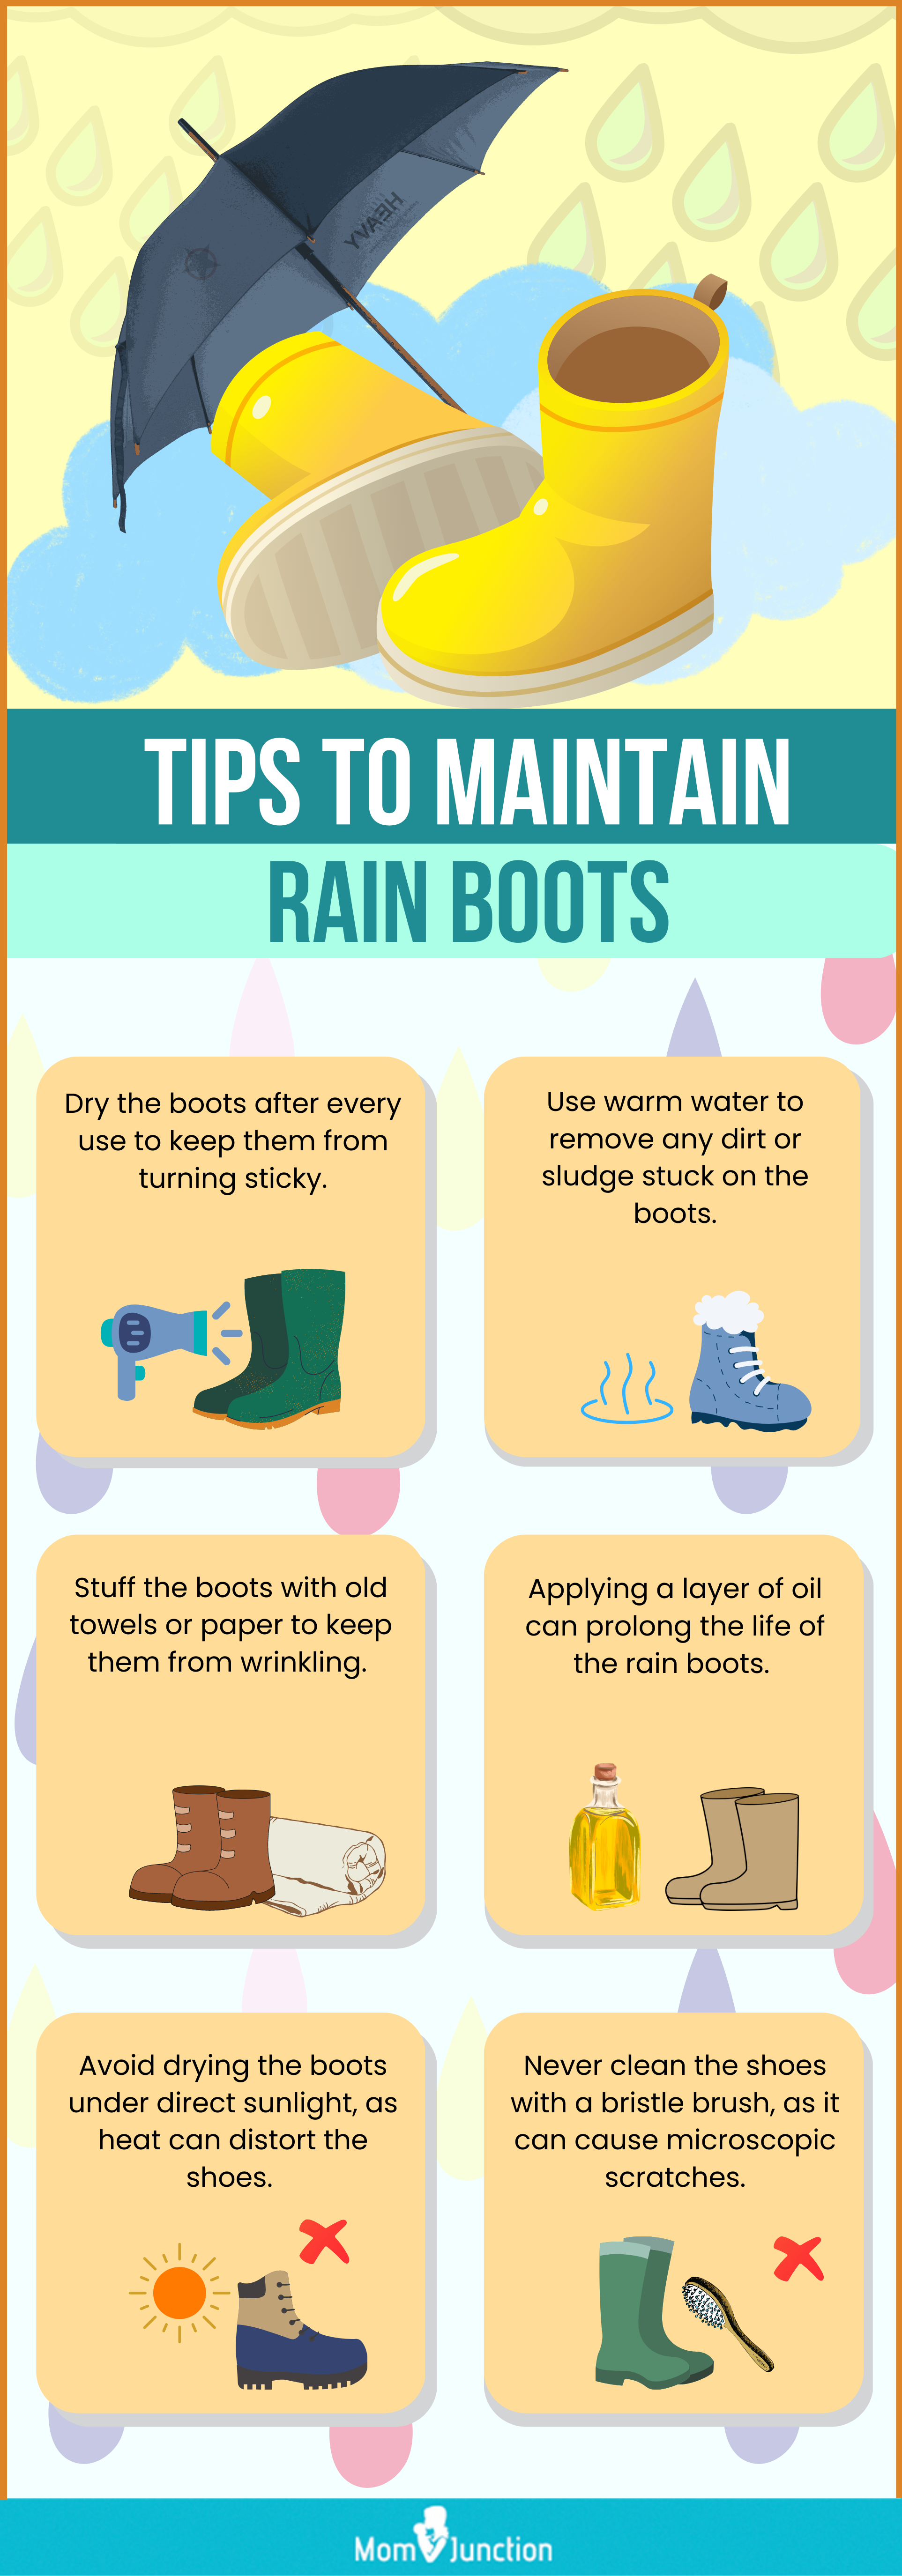 Tips To Maintain Rain Boots (infographic)